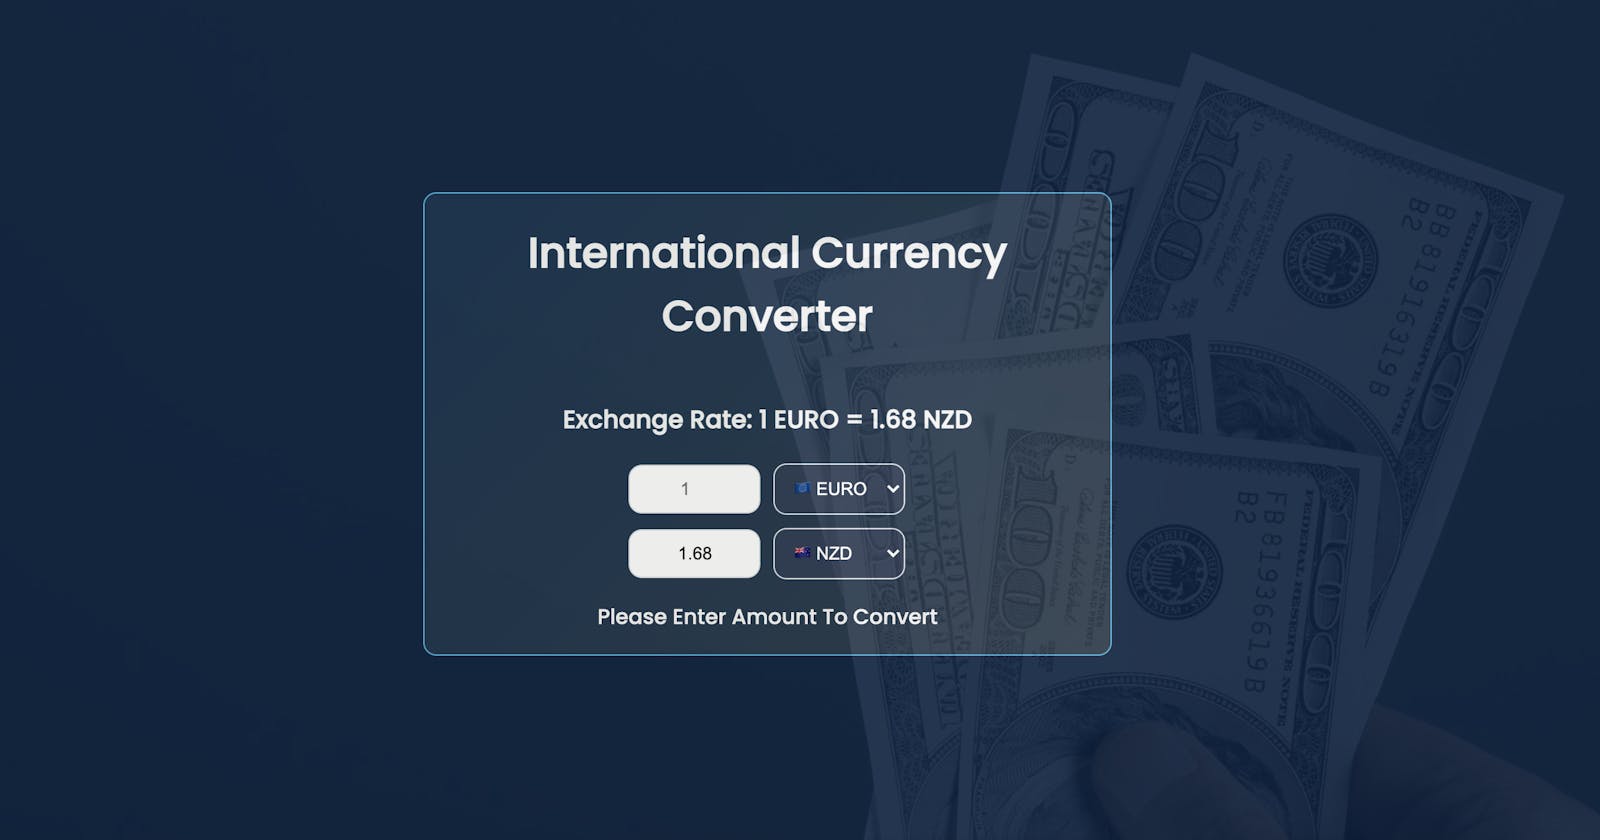 Create  A Currency Convertor Using HTML, CSS & Javascript.